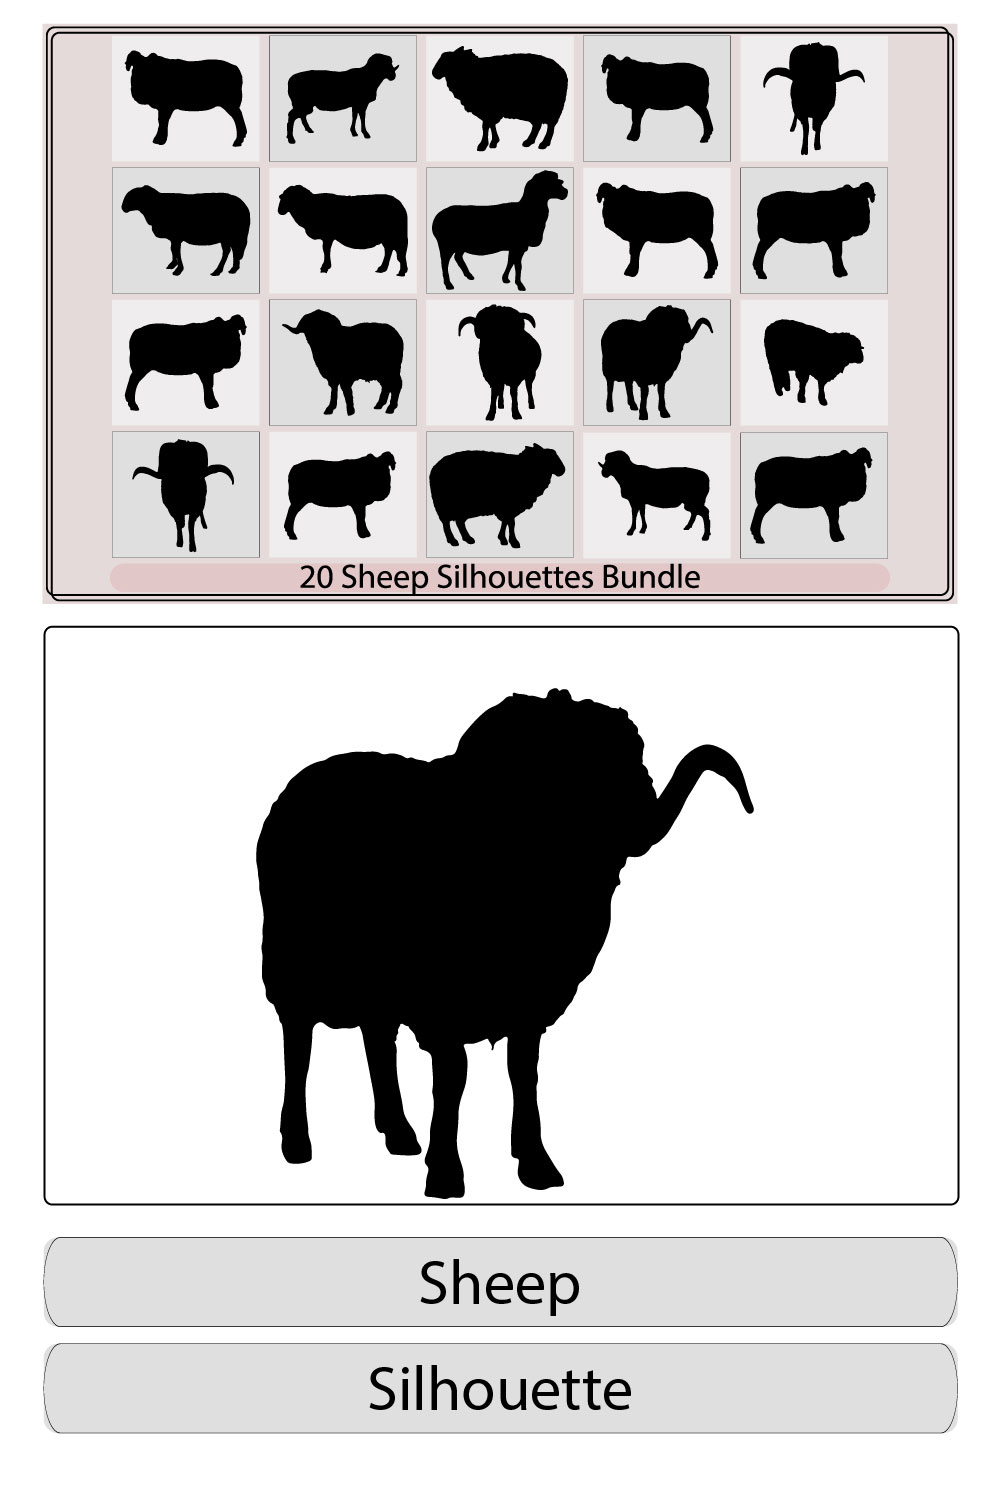 Sheep Silhouette,Sheep Icon,Sheep silhouette with standing pose,Lamb or Sheep icon, pinterest preview image.